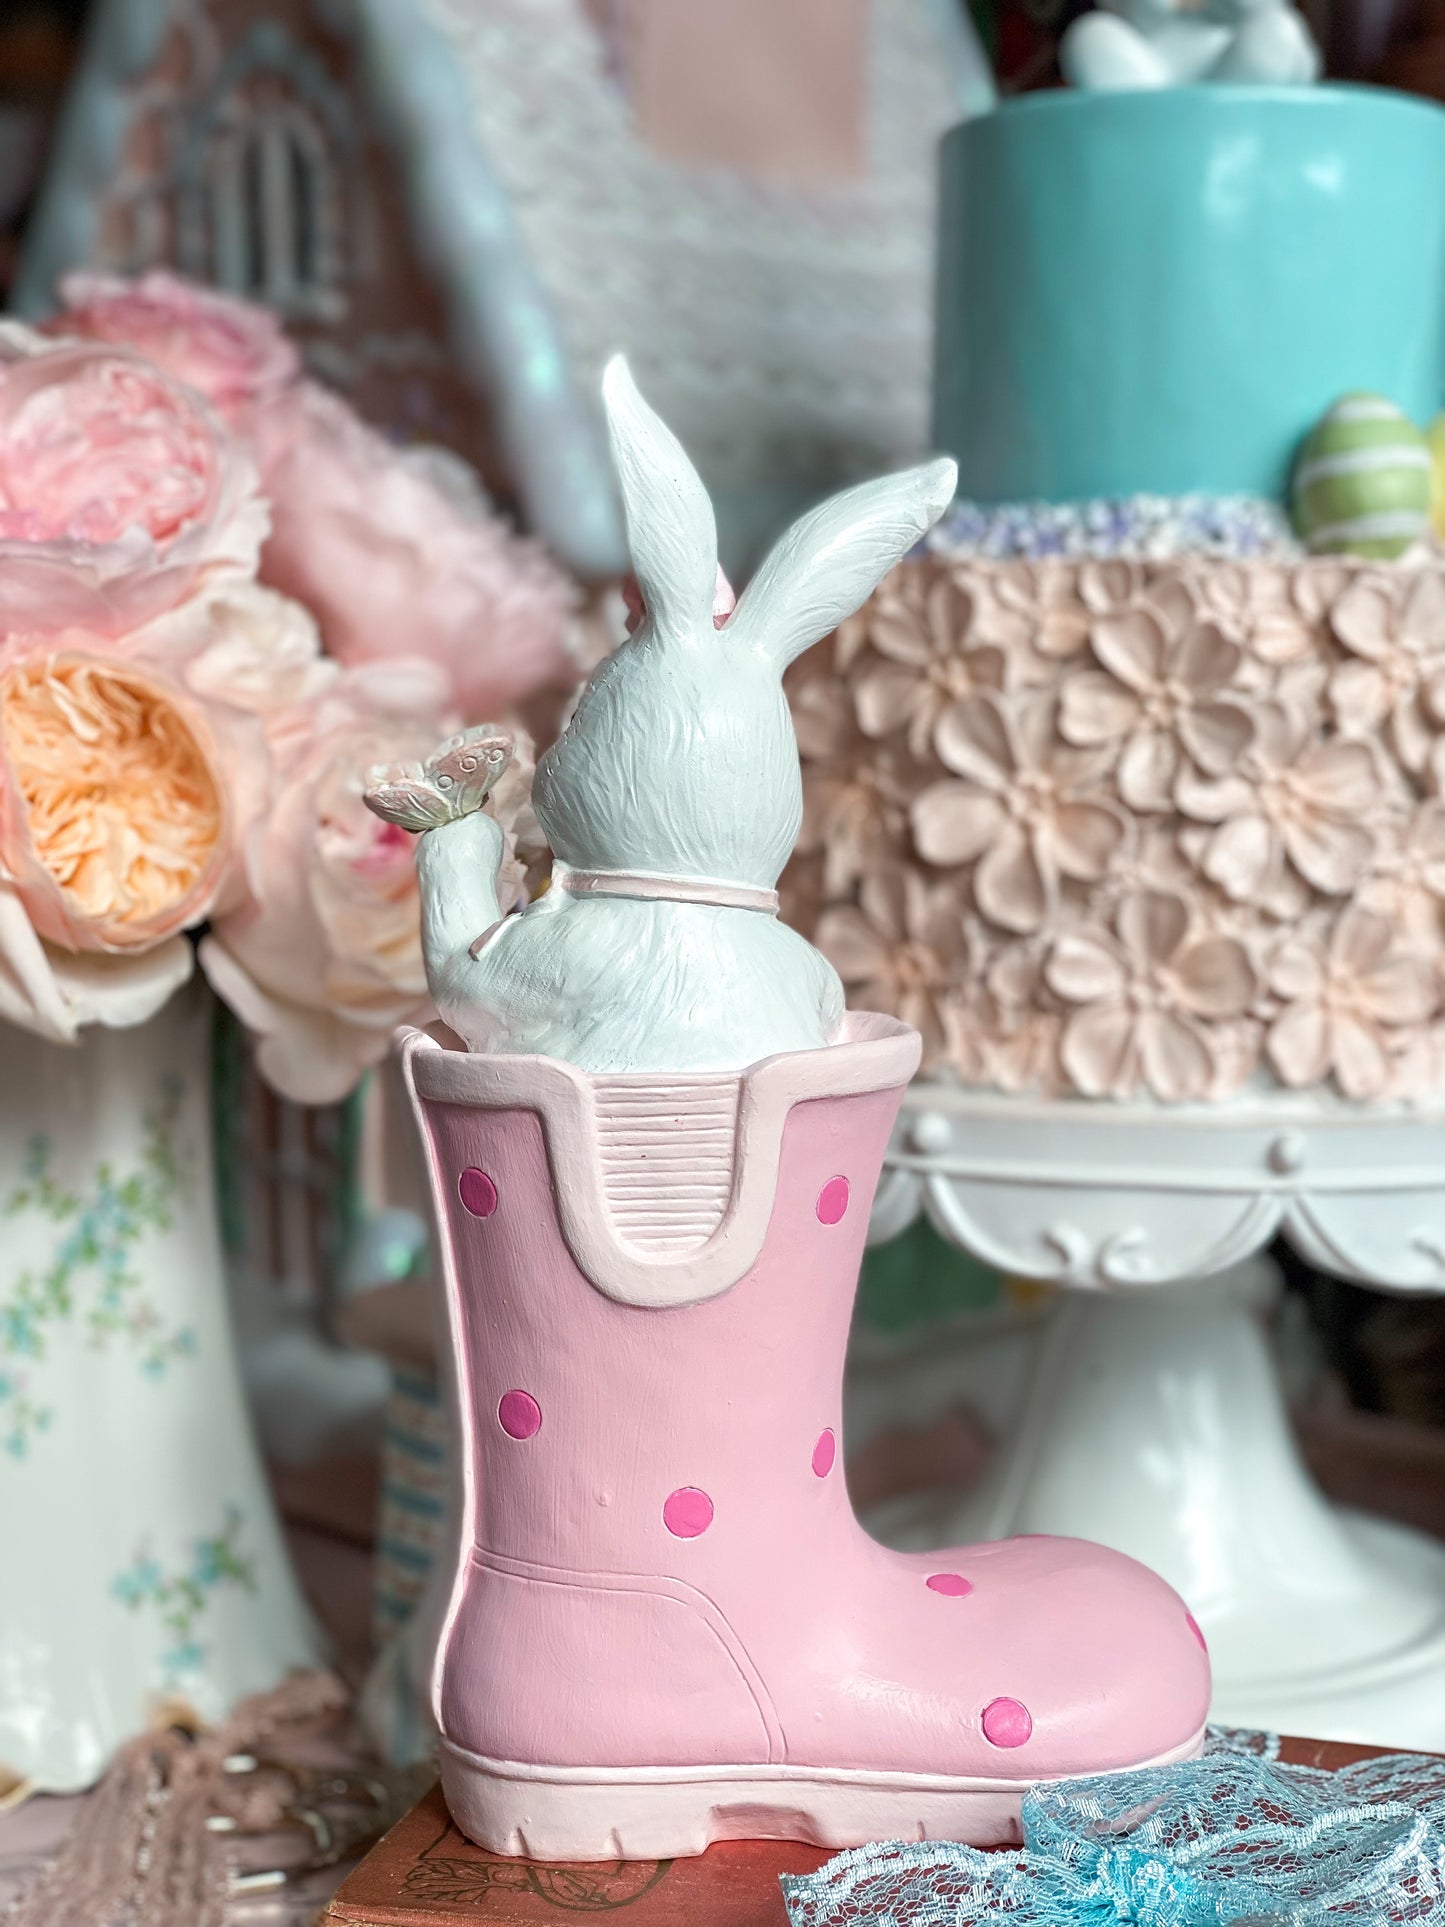 Bespoke Easter Bunny in Pastel Pink Wellie Boot holding Butterfly